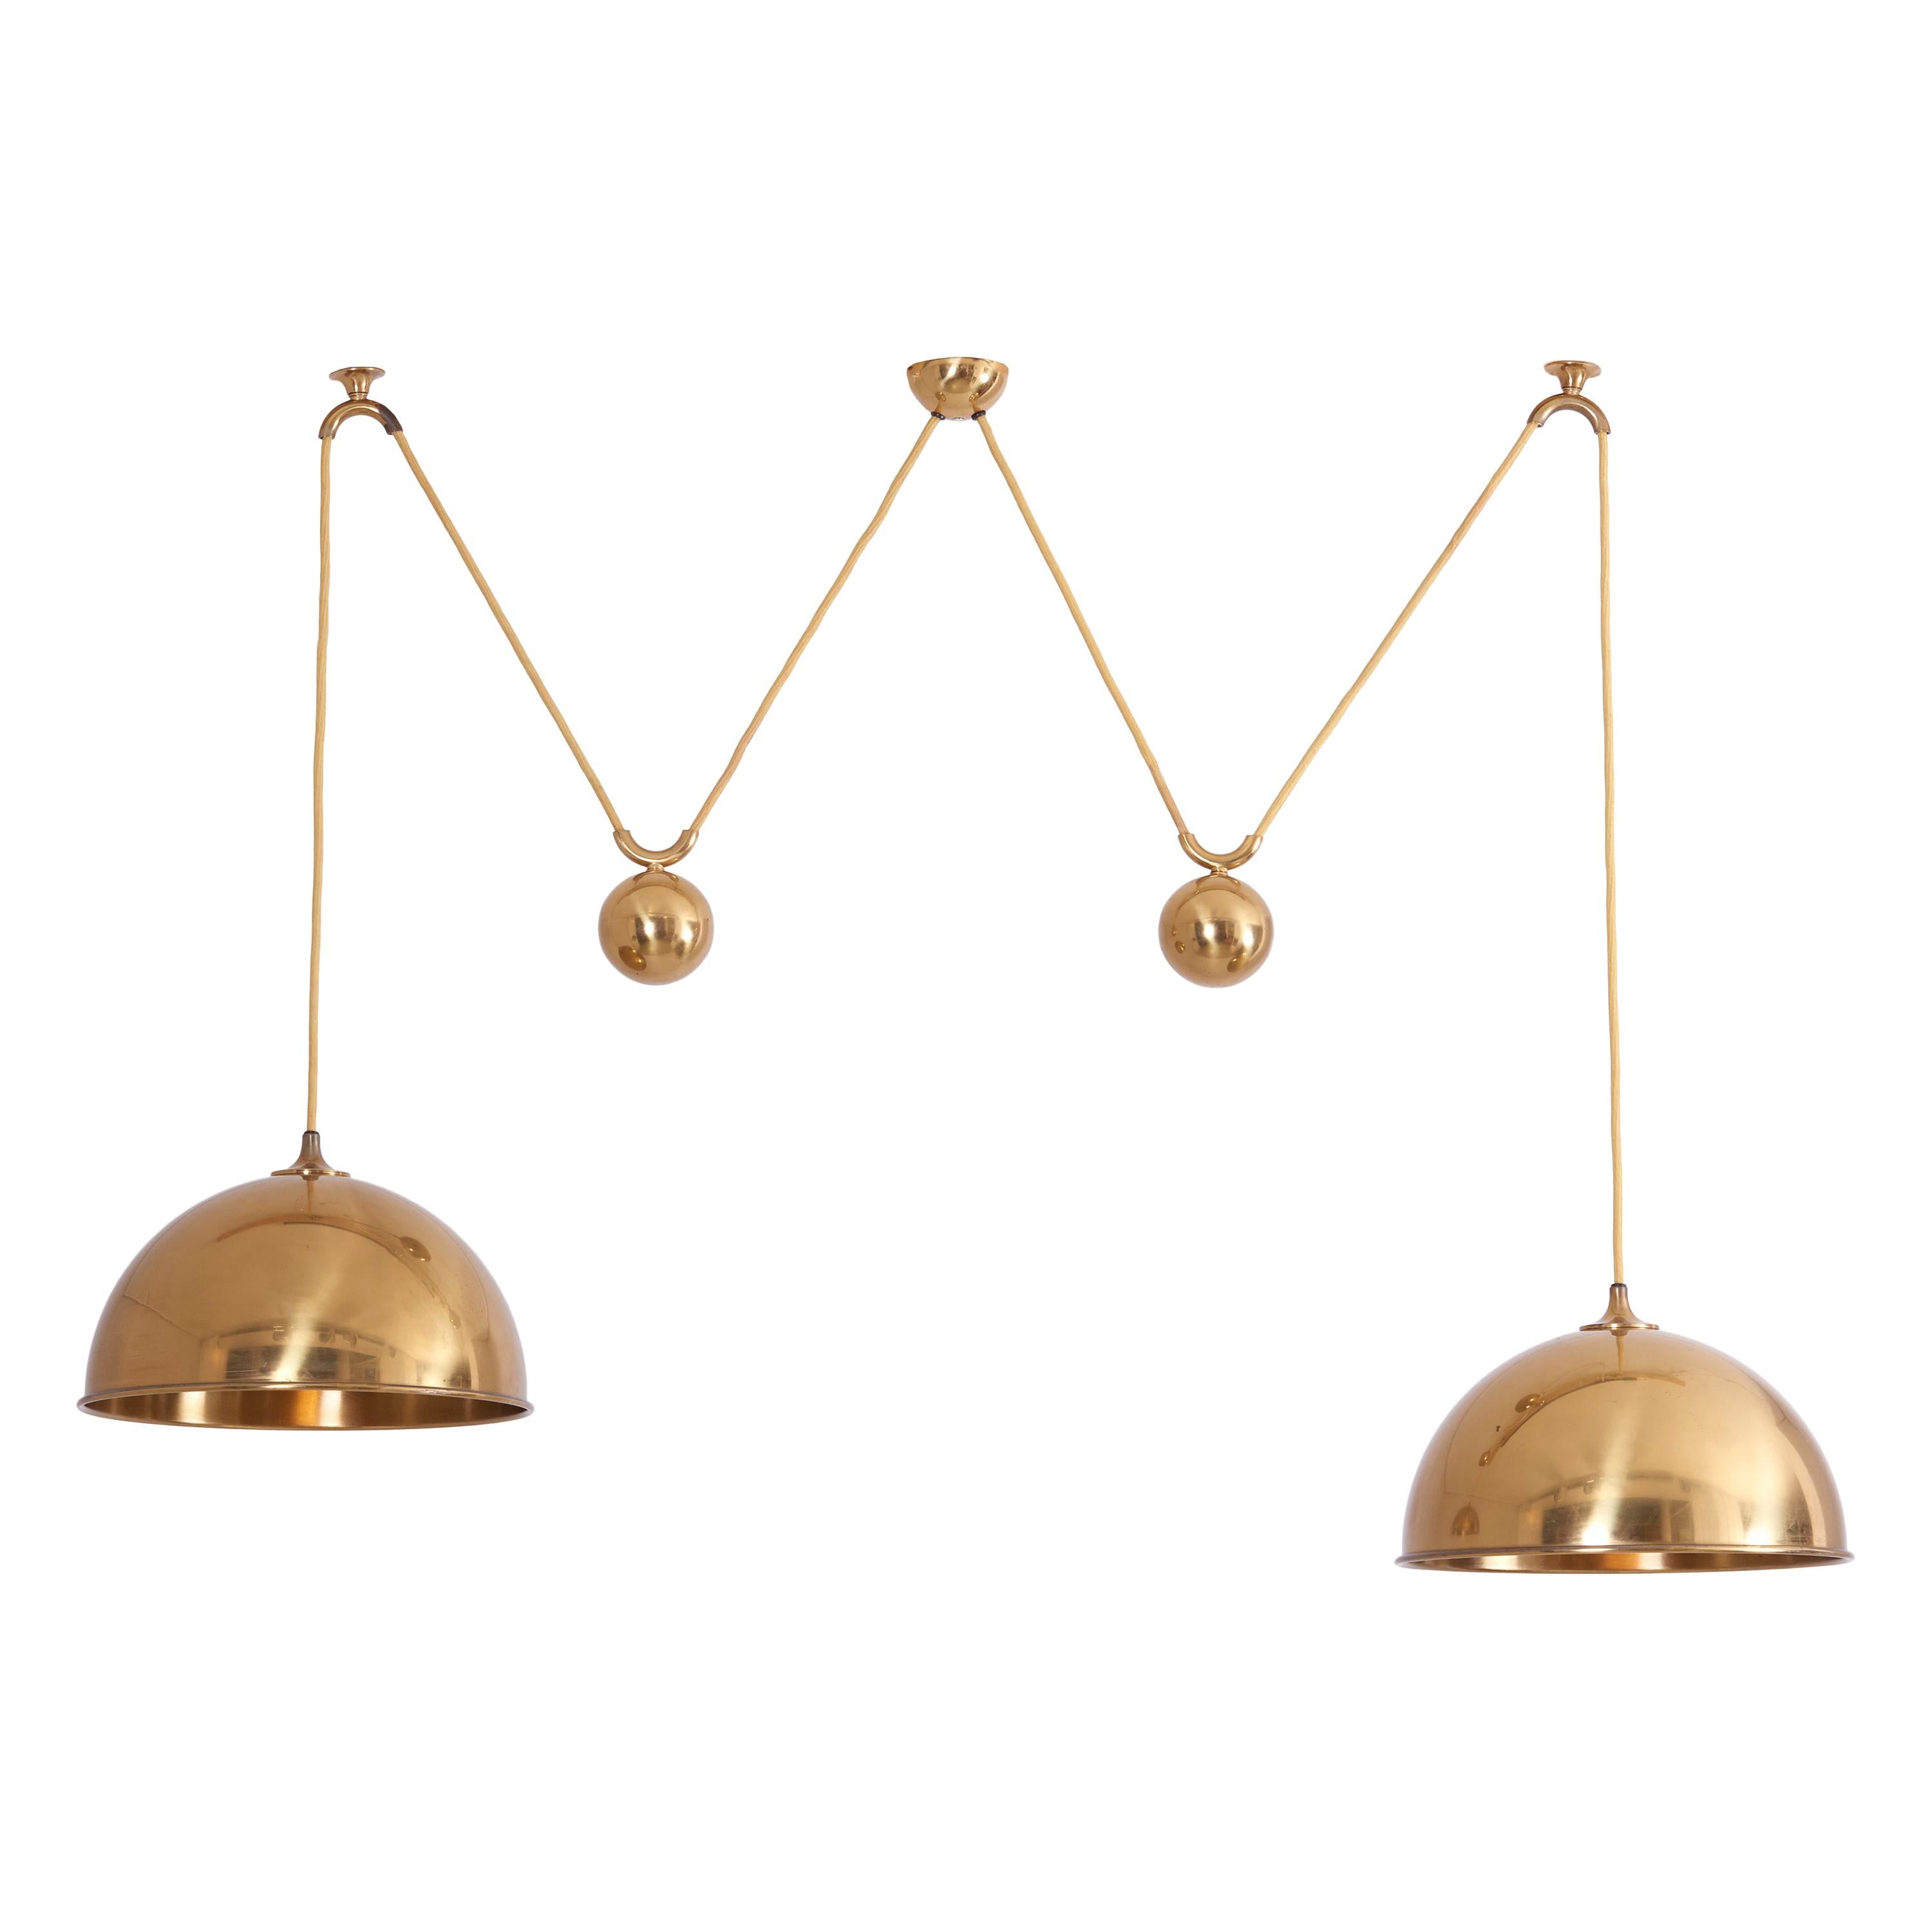 Double Posa Pendant Lamp with Side Counter Weights by Florian Schulz, 1970s